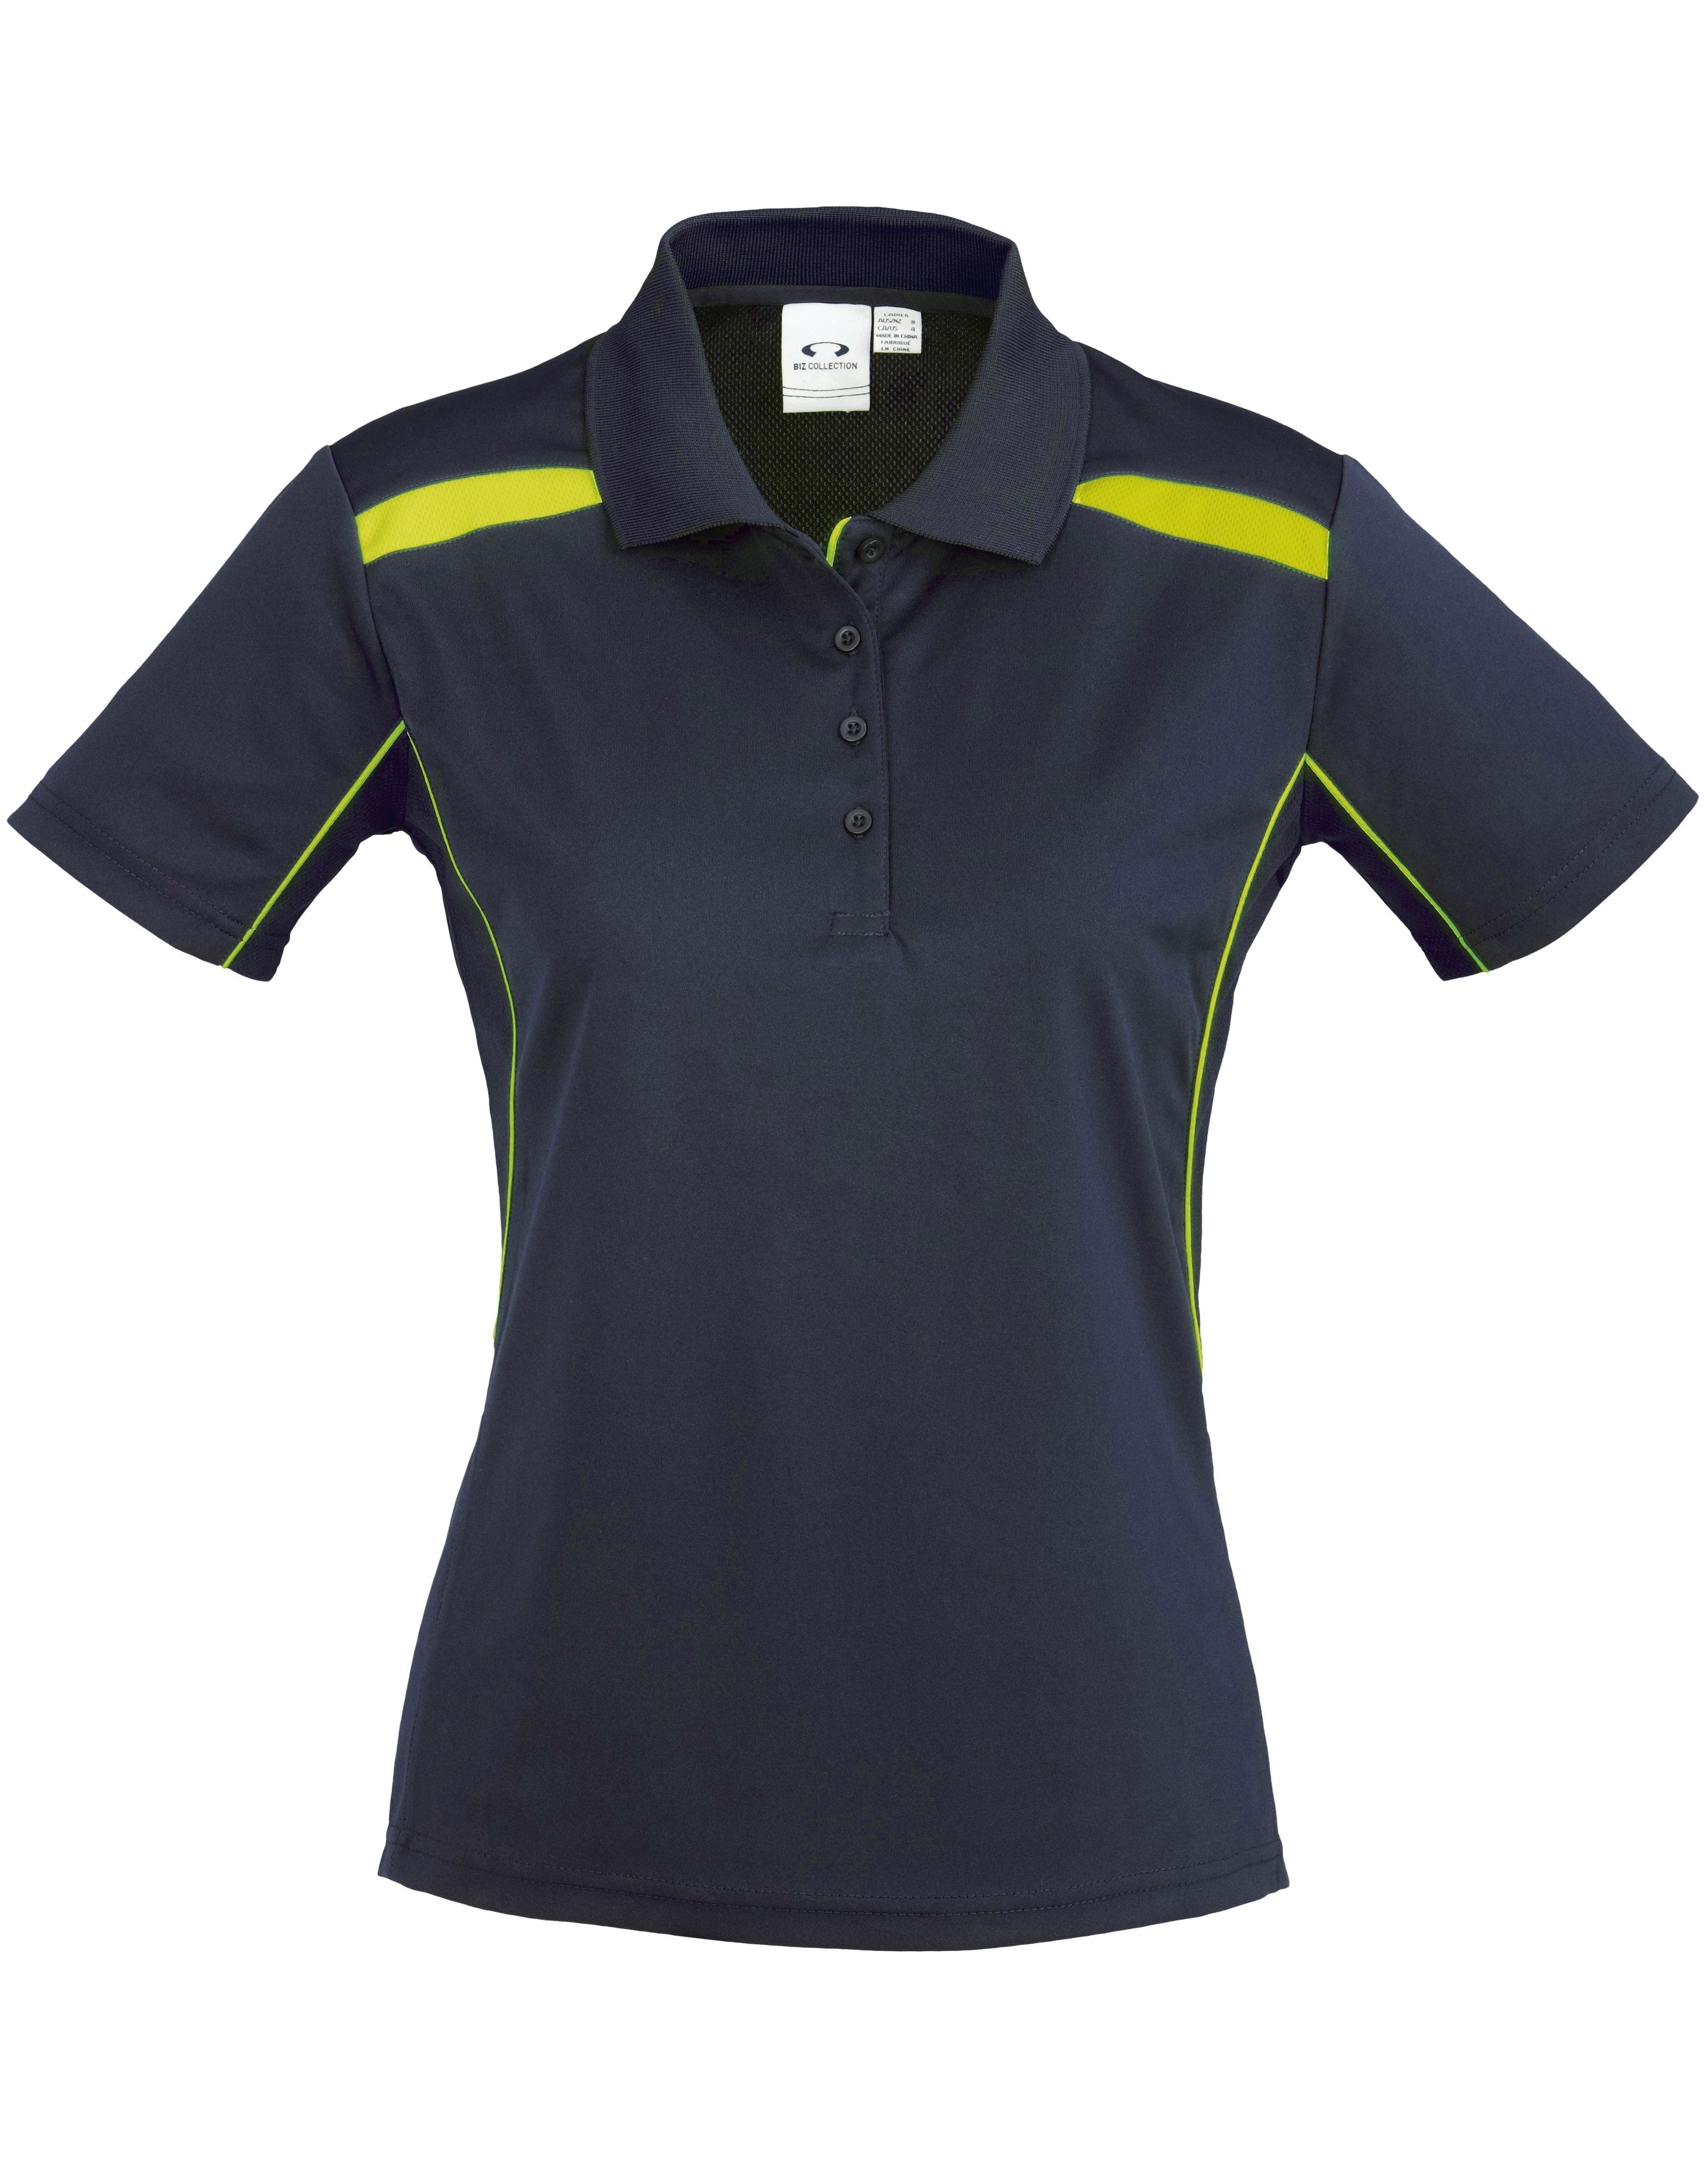 Ladies United Golf Shirt - White Navy Only-L-Navy With Lime-NL